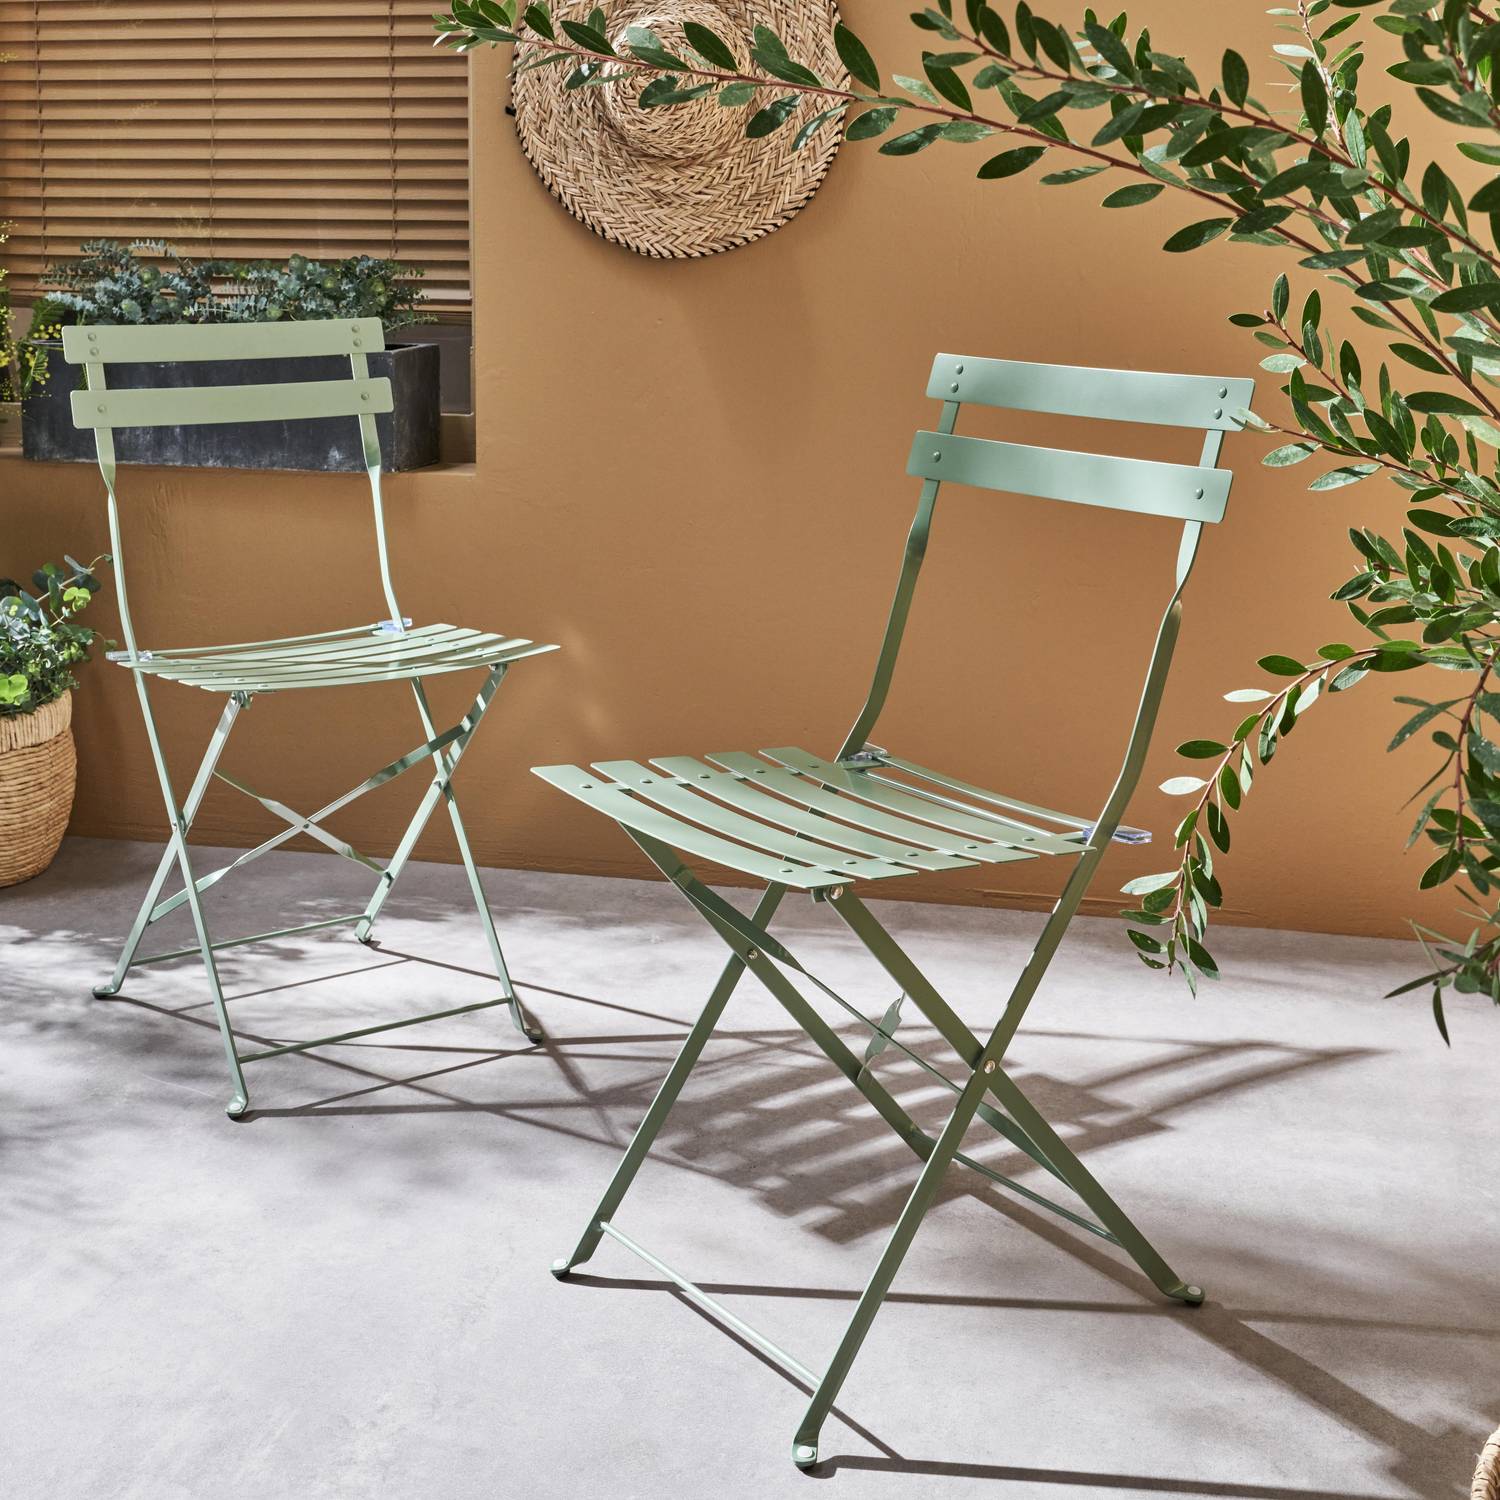 Set of 2 foldable bistro chairs - Emilia sage green - Thermo-lacquered steel Photo1